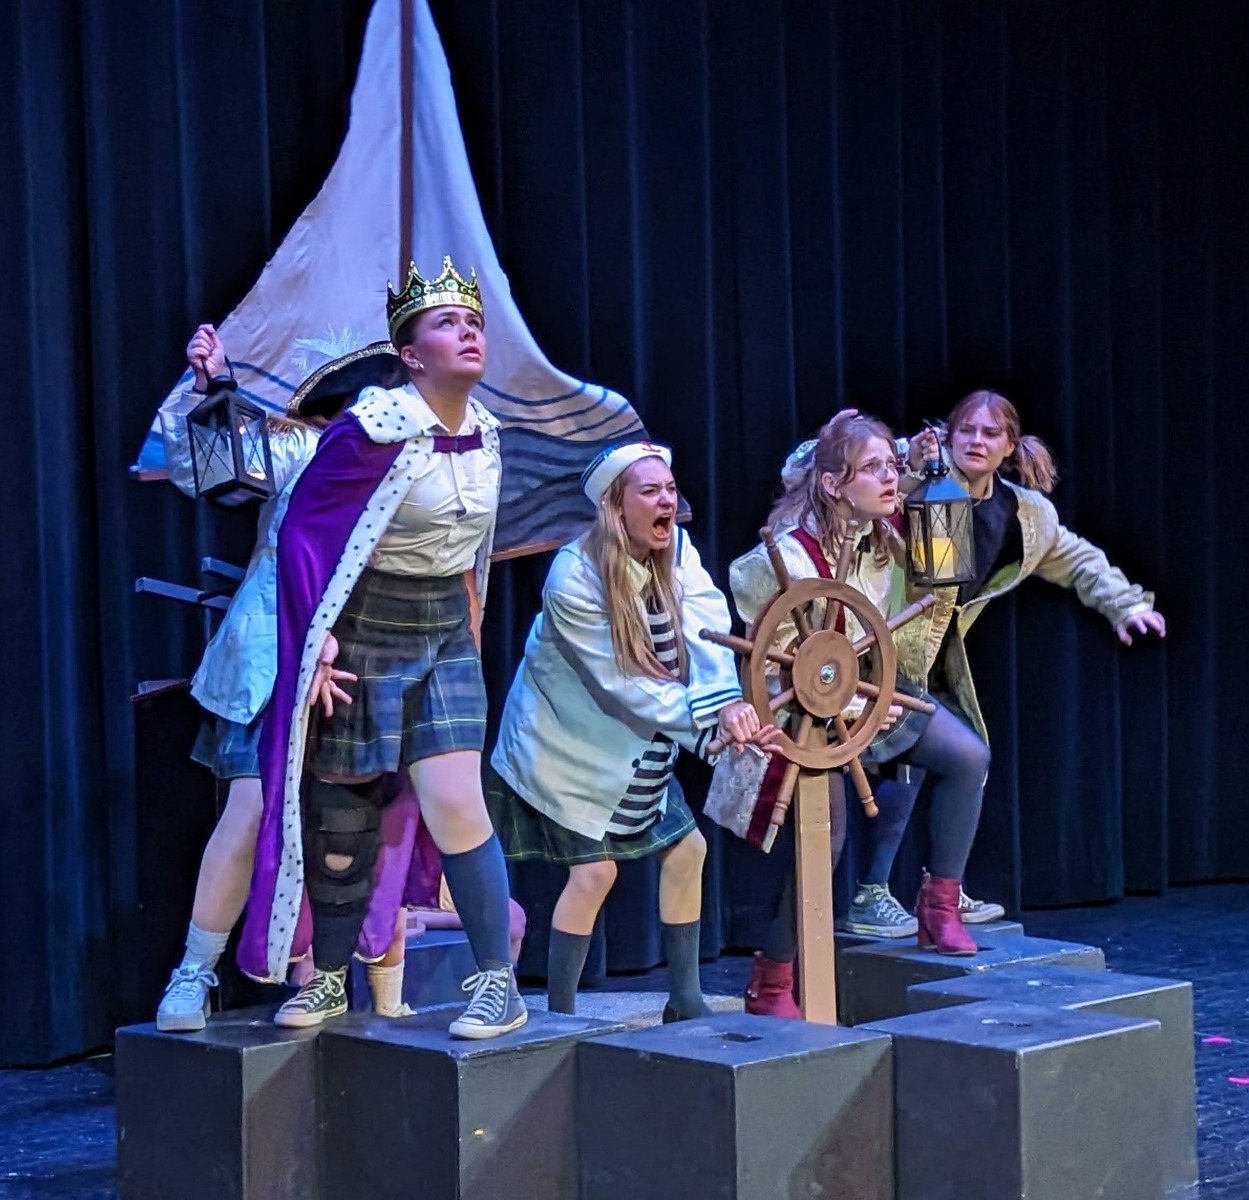 Wild Waves Whist, a one-act drama by Patty MacMullen, GPAC Theatre. Photo: S. Hammer.